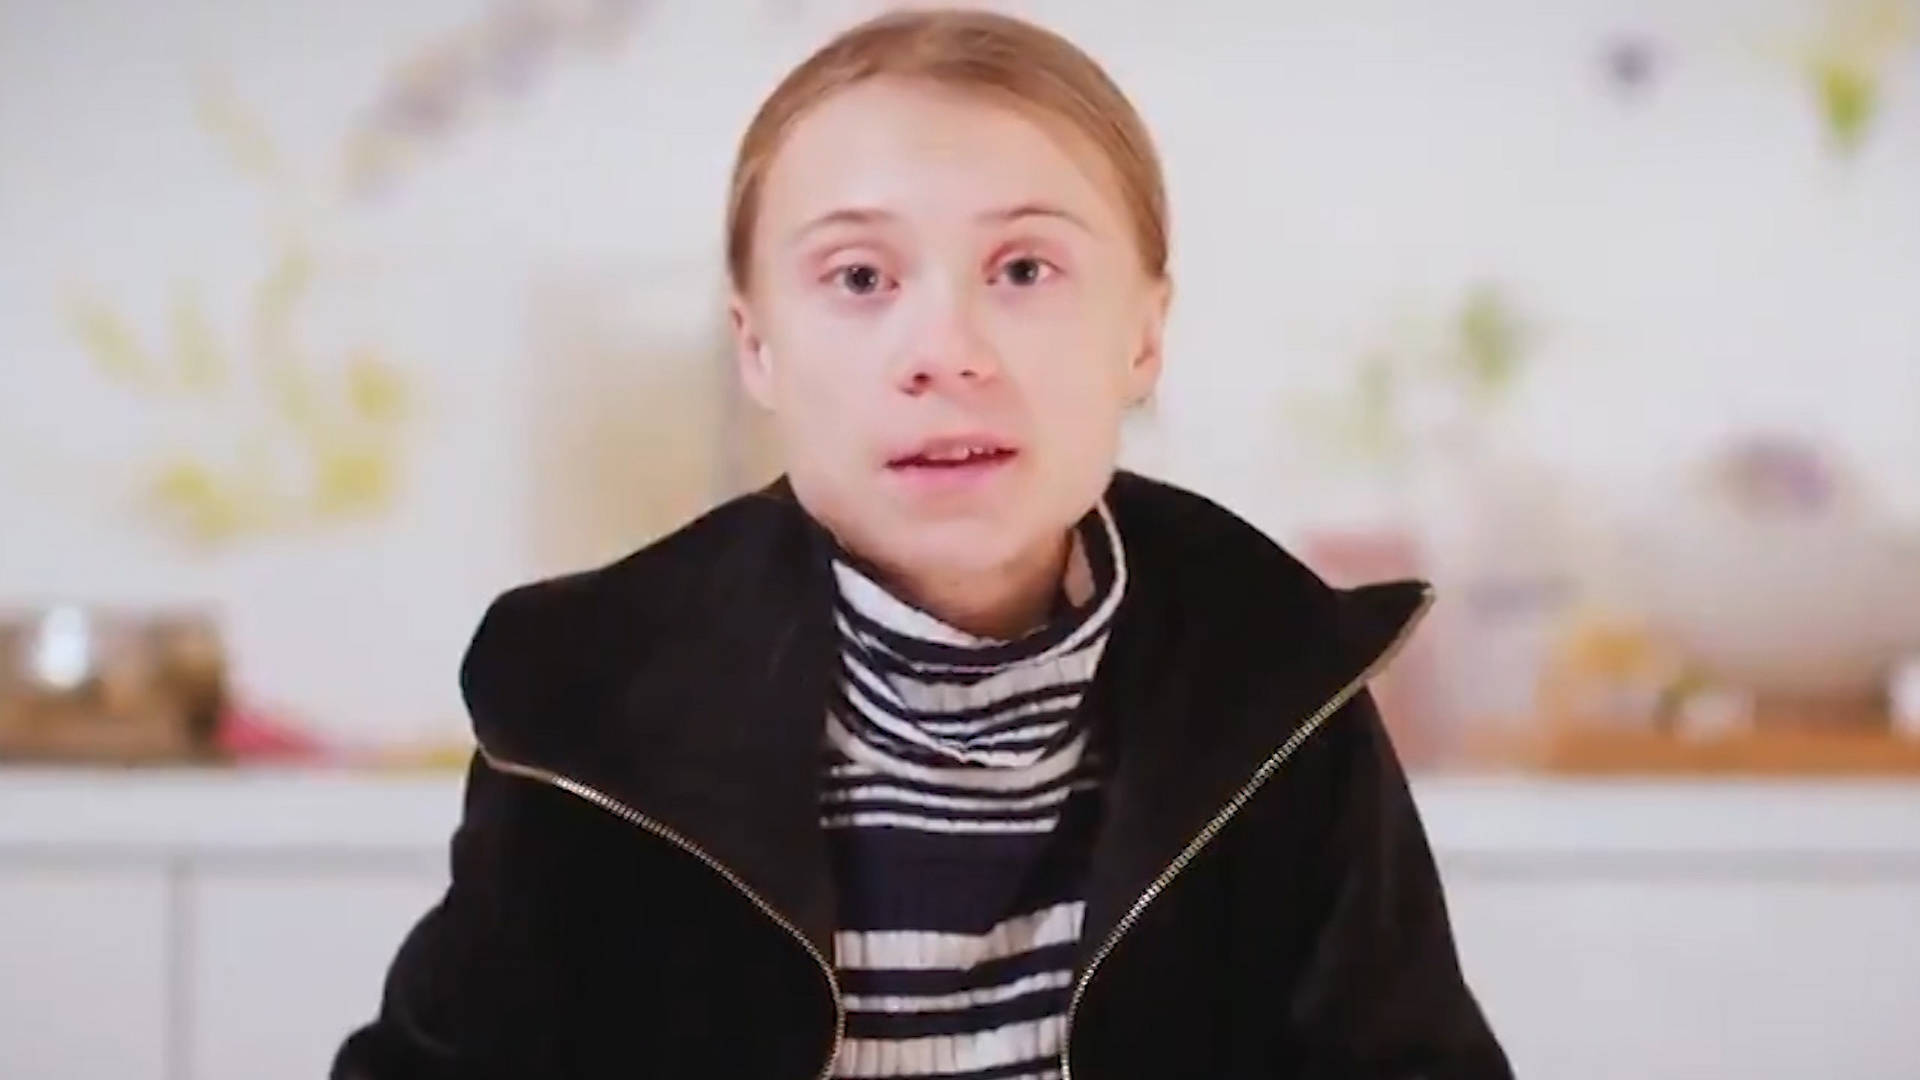 greta-thunberg-5-years-after-paris-agreement-world-is-speeding-in-the-wrong-direction-on-climate